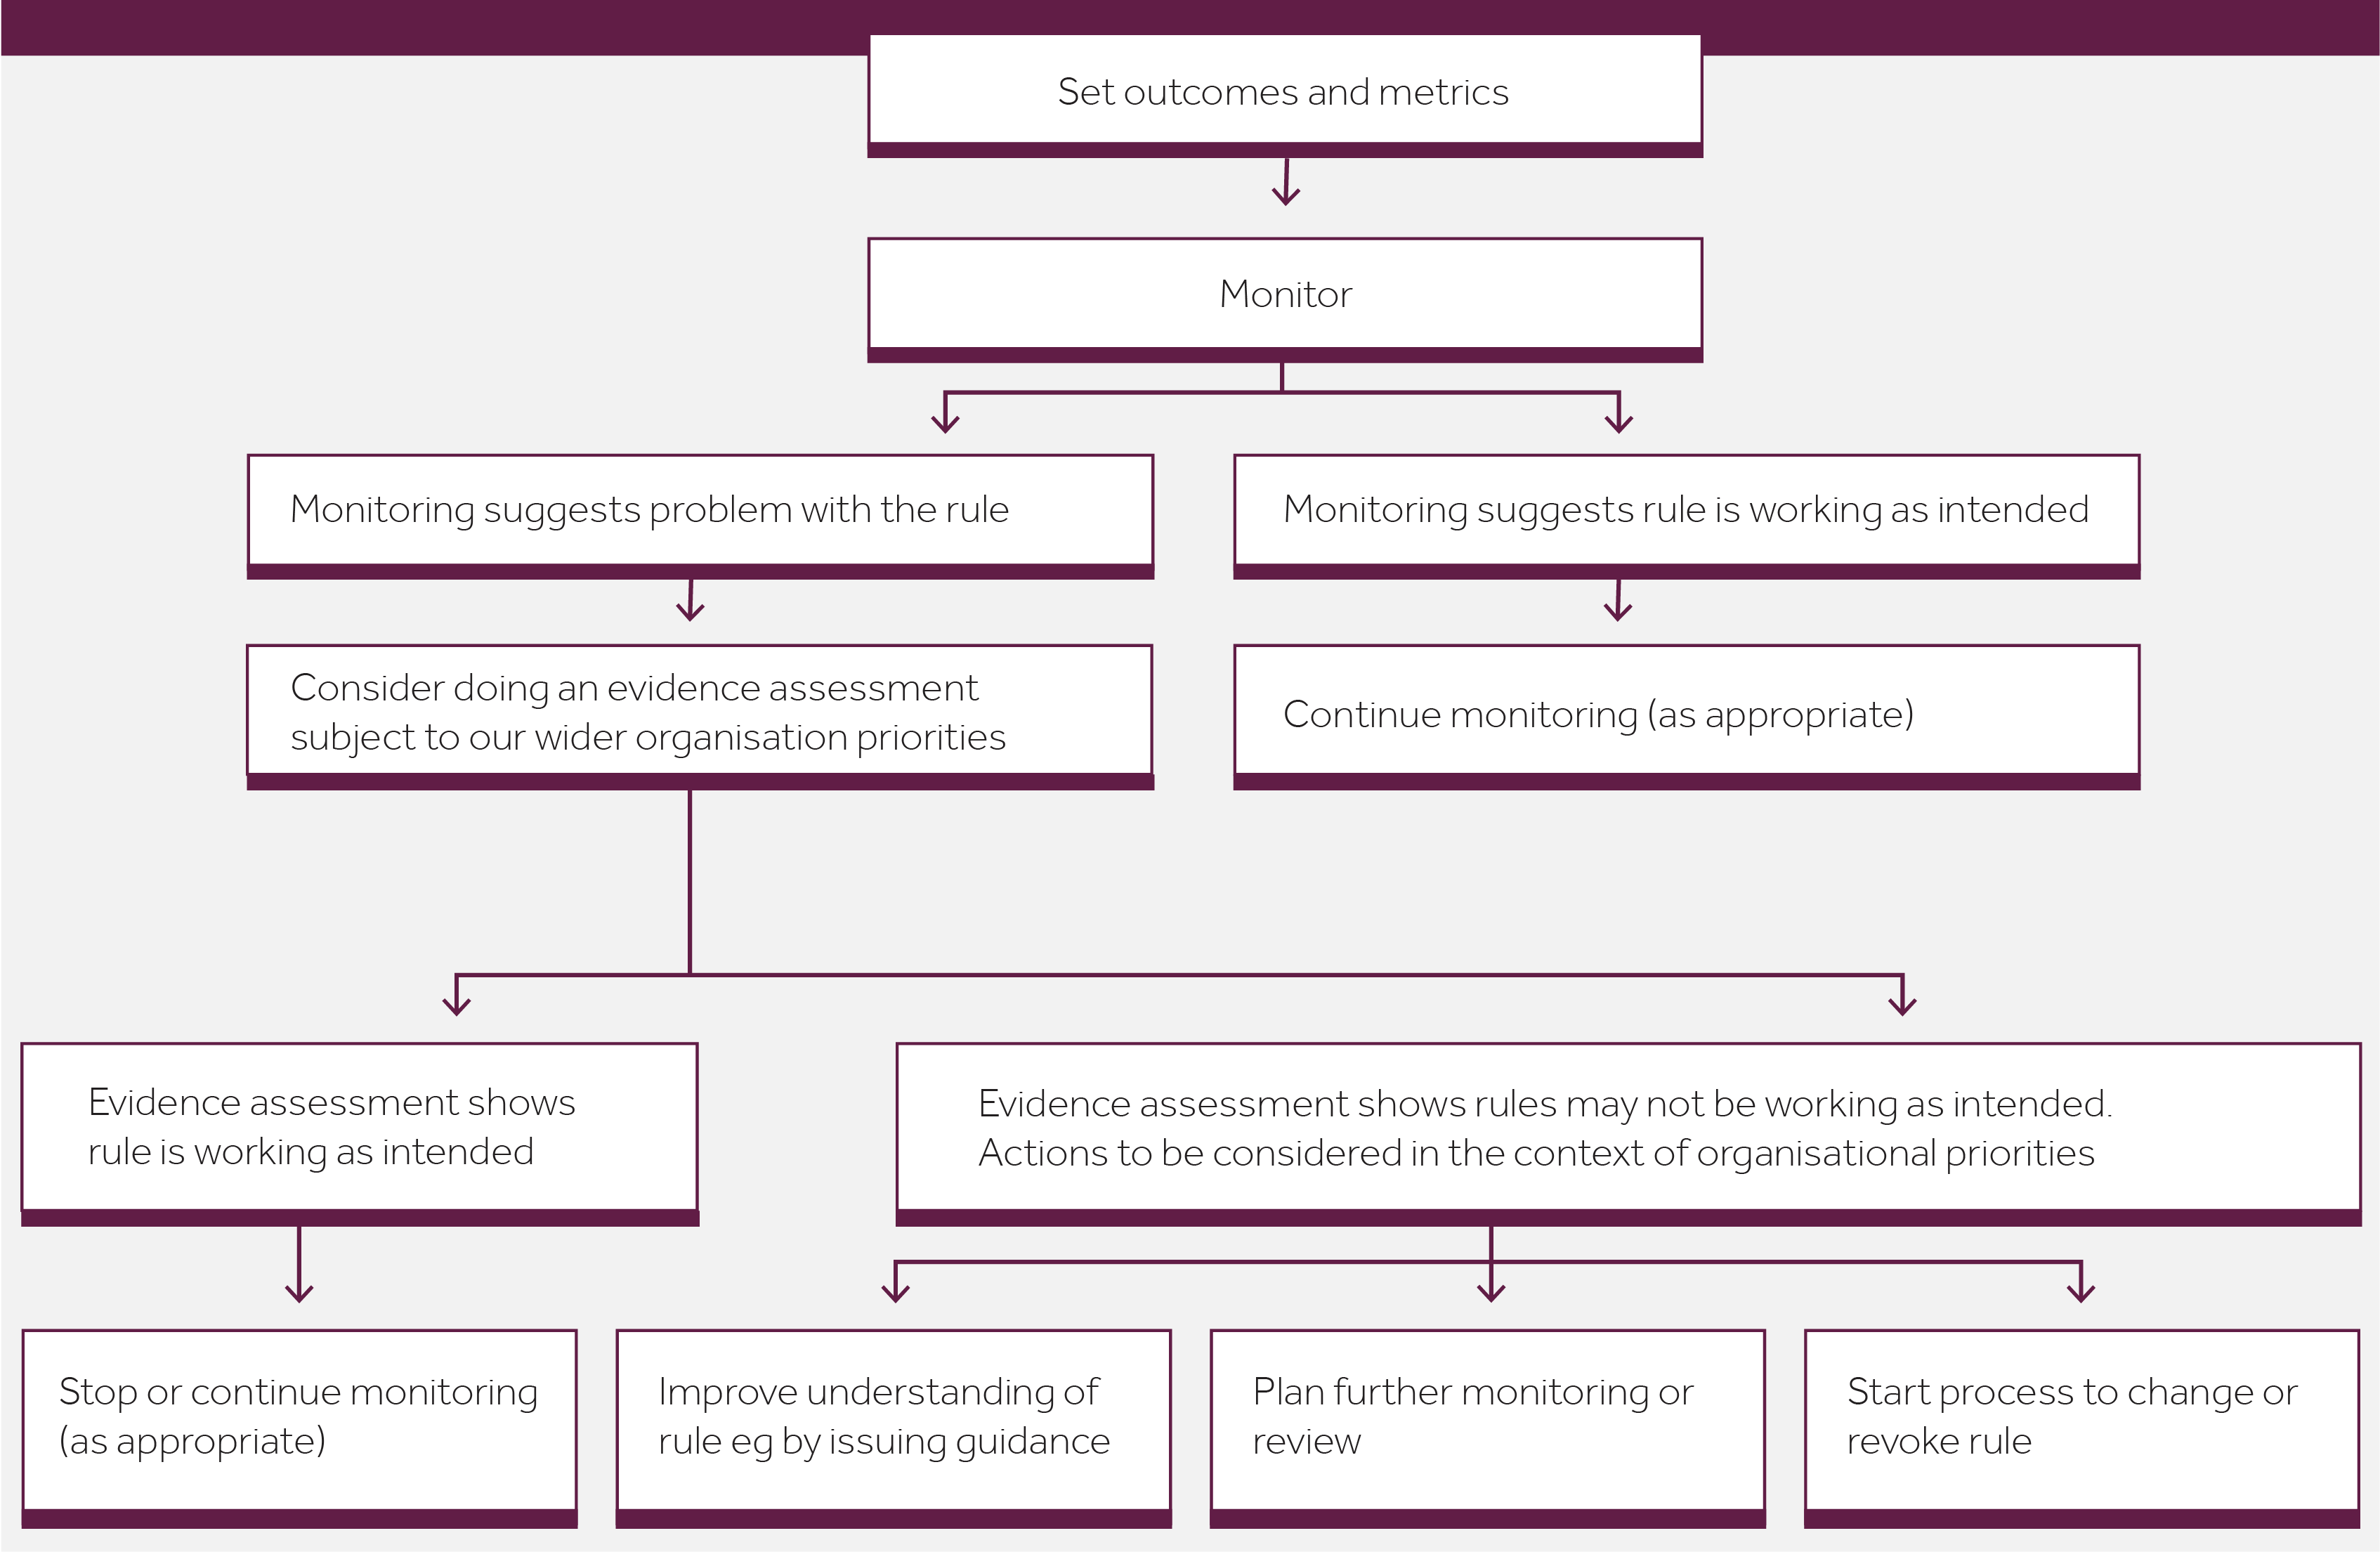 Figure 1: Overview of rule review process for new rules